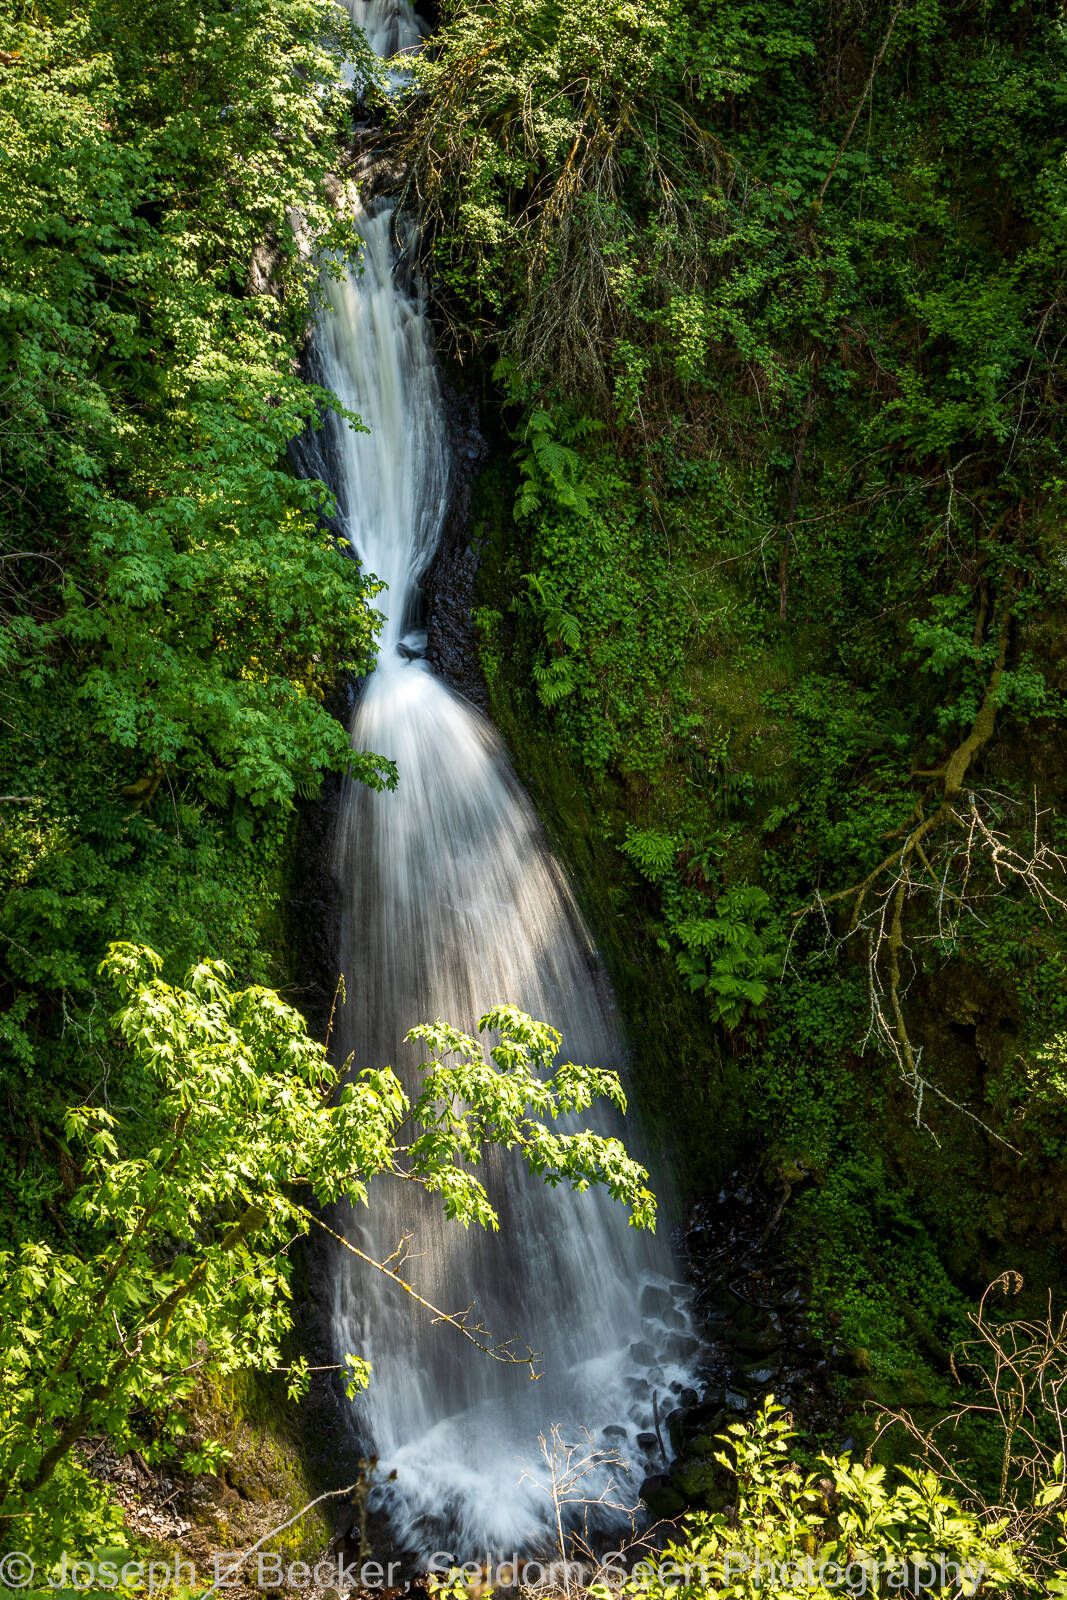 Image of Sheppards Dell Falls by Joe Becker